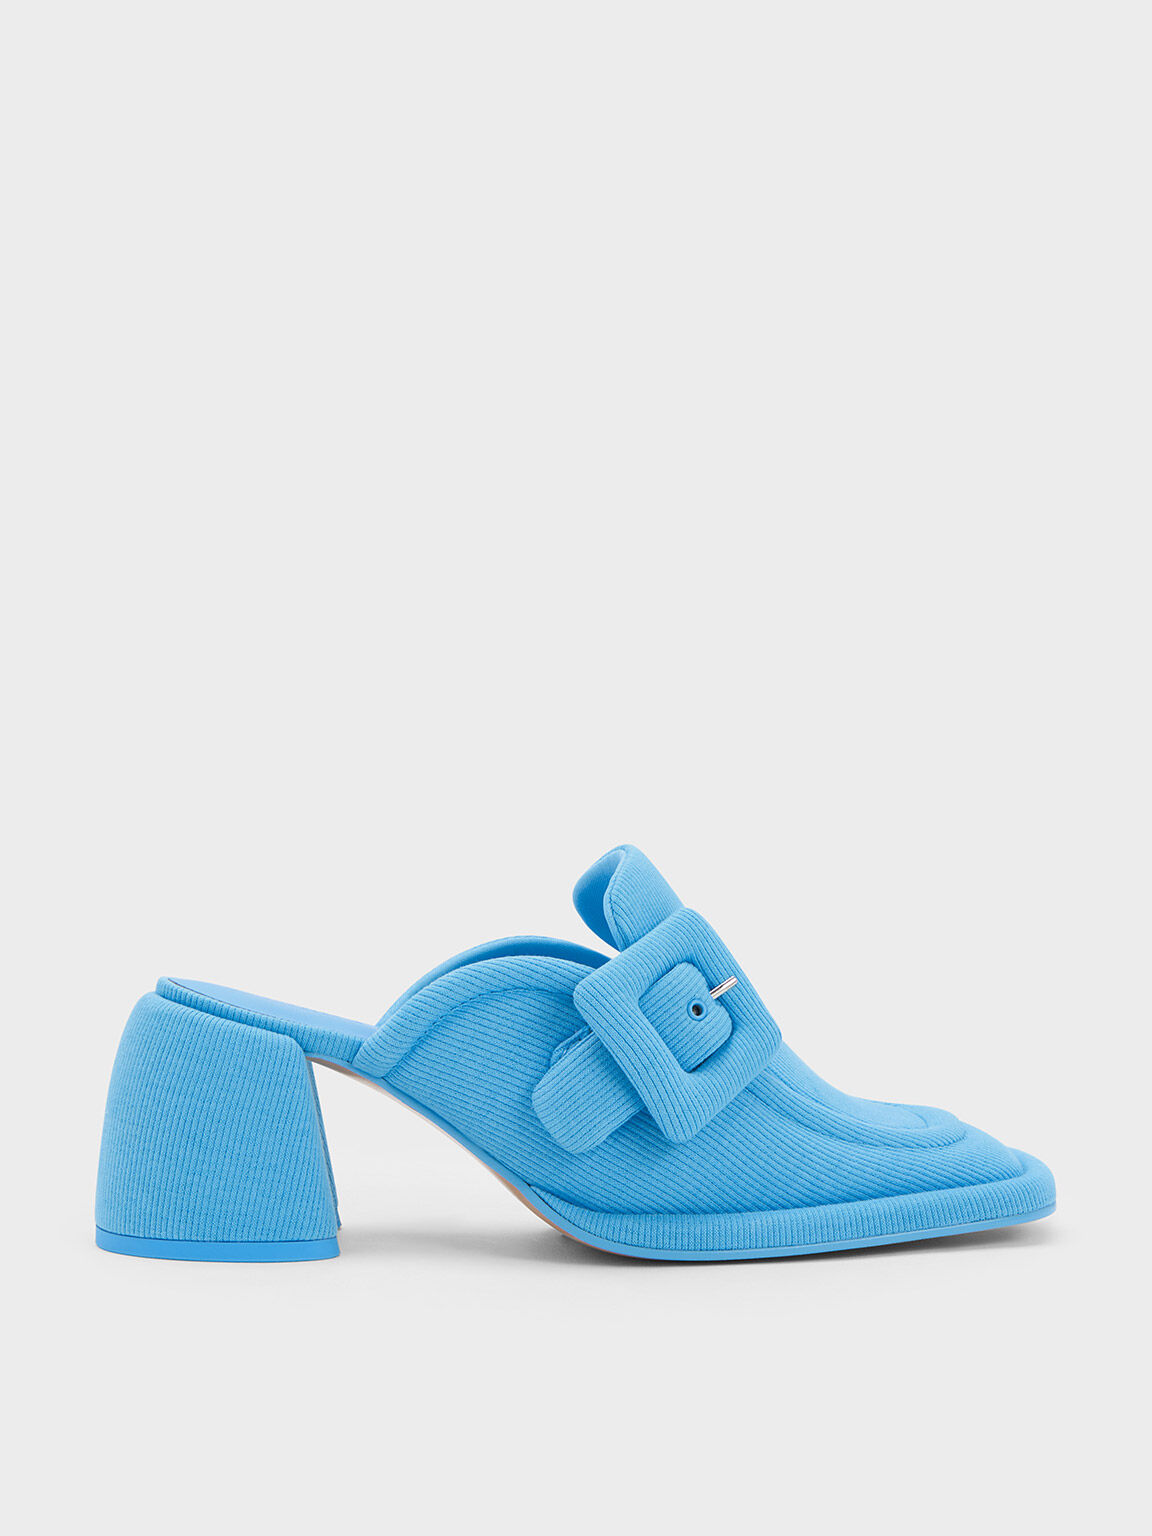 Sinead Woven Buckled Loafer Mules, Blue, hi-res